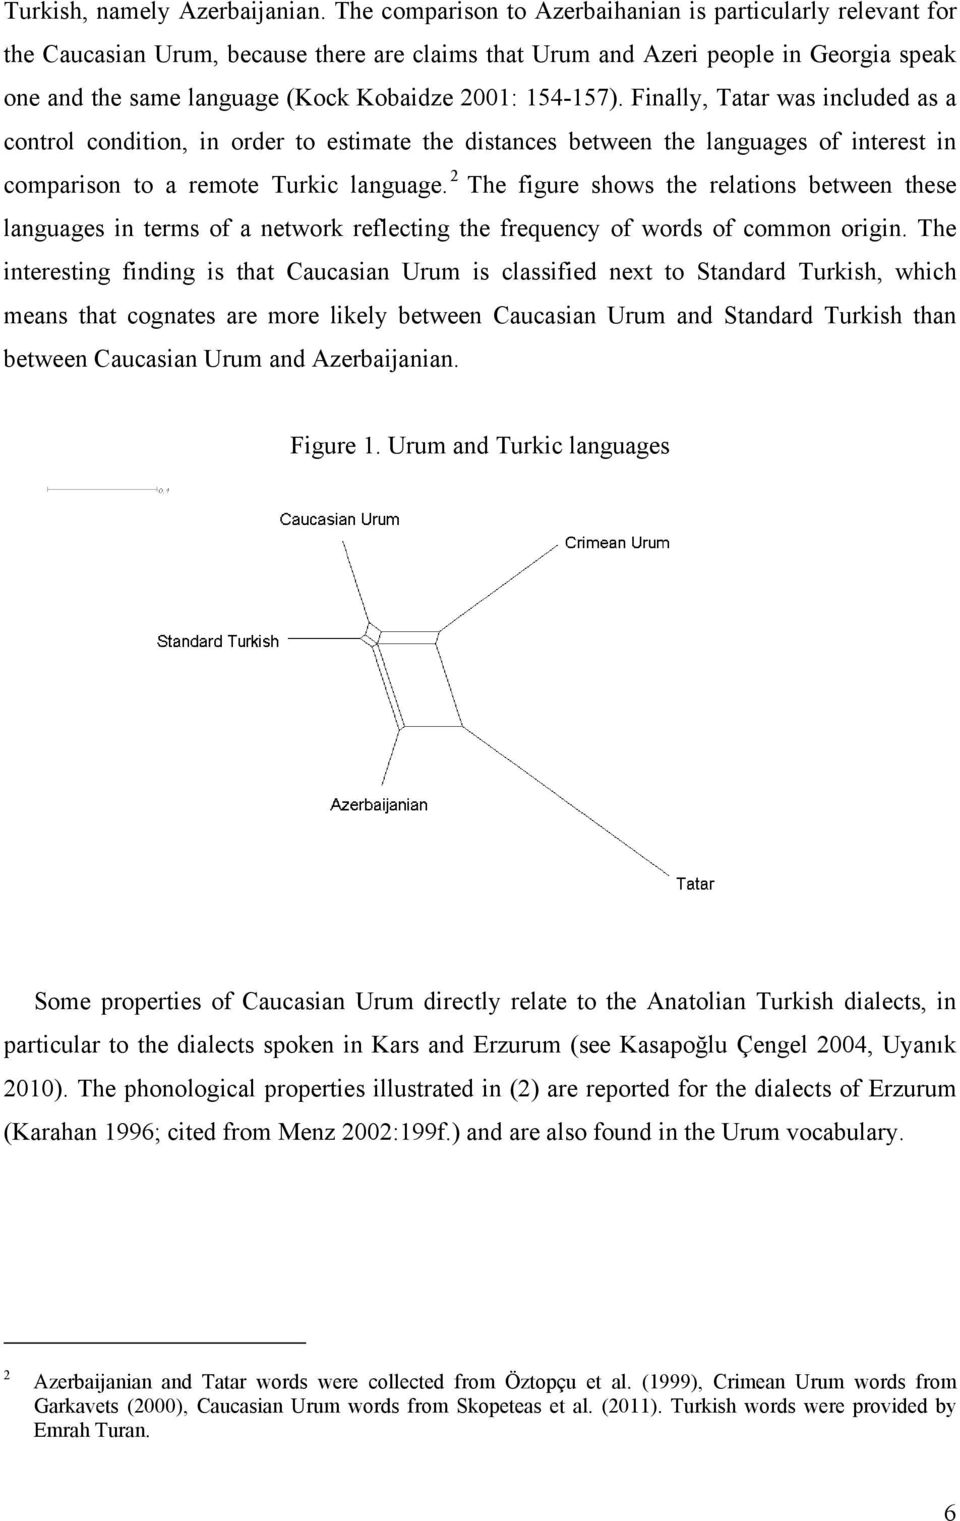 154-157). Finally, Tatar was included as a control condition, in order to estimate the distances between the languages of interest in comparison to a remote Turkic language.